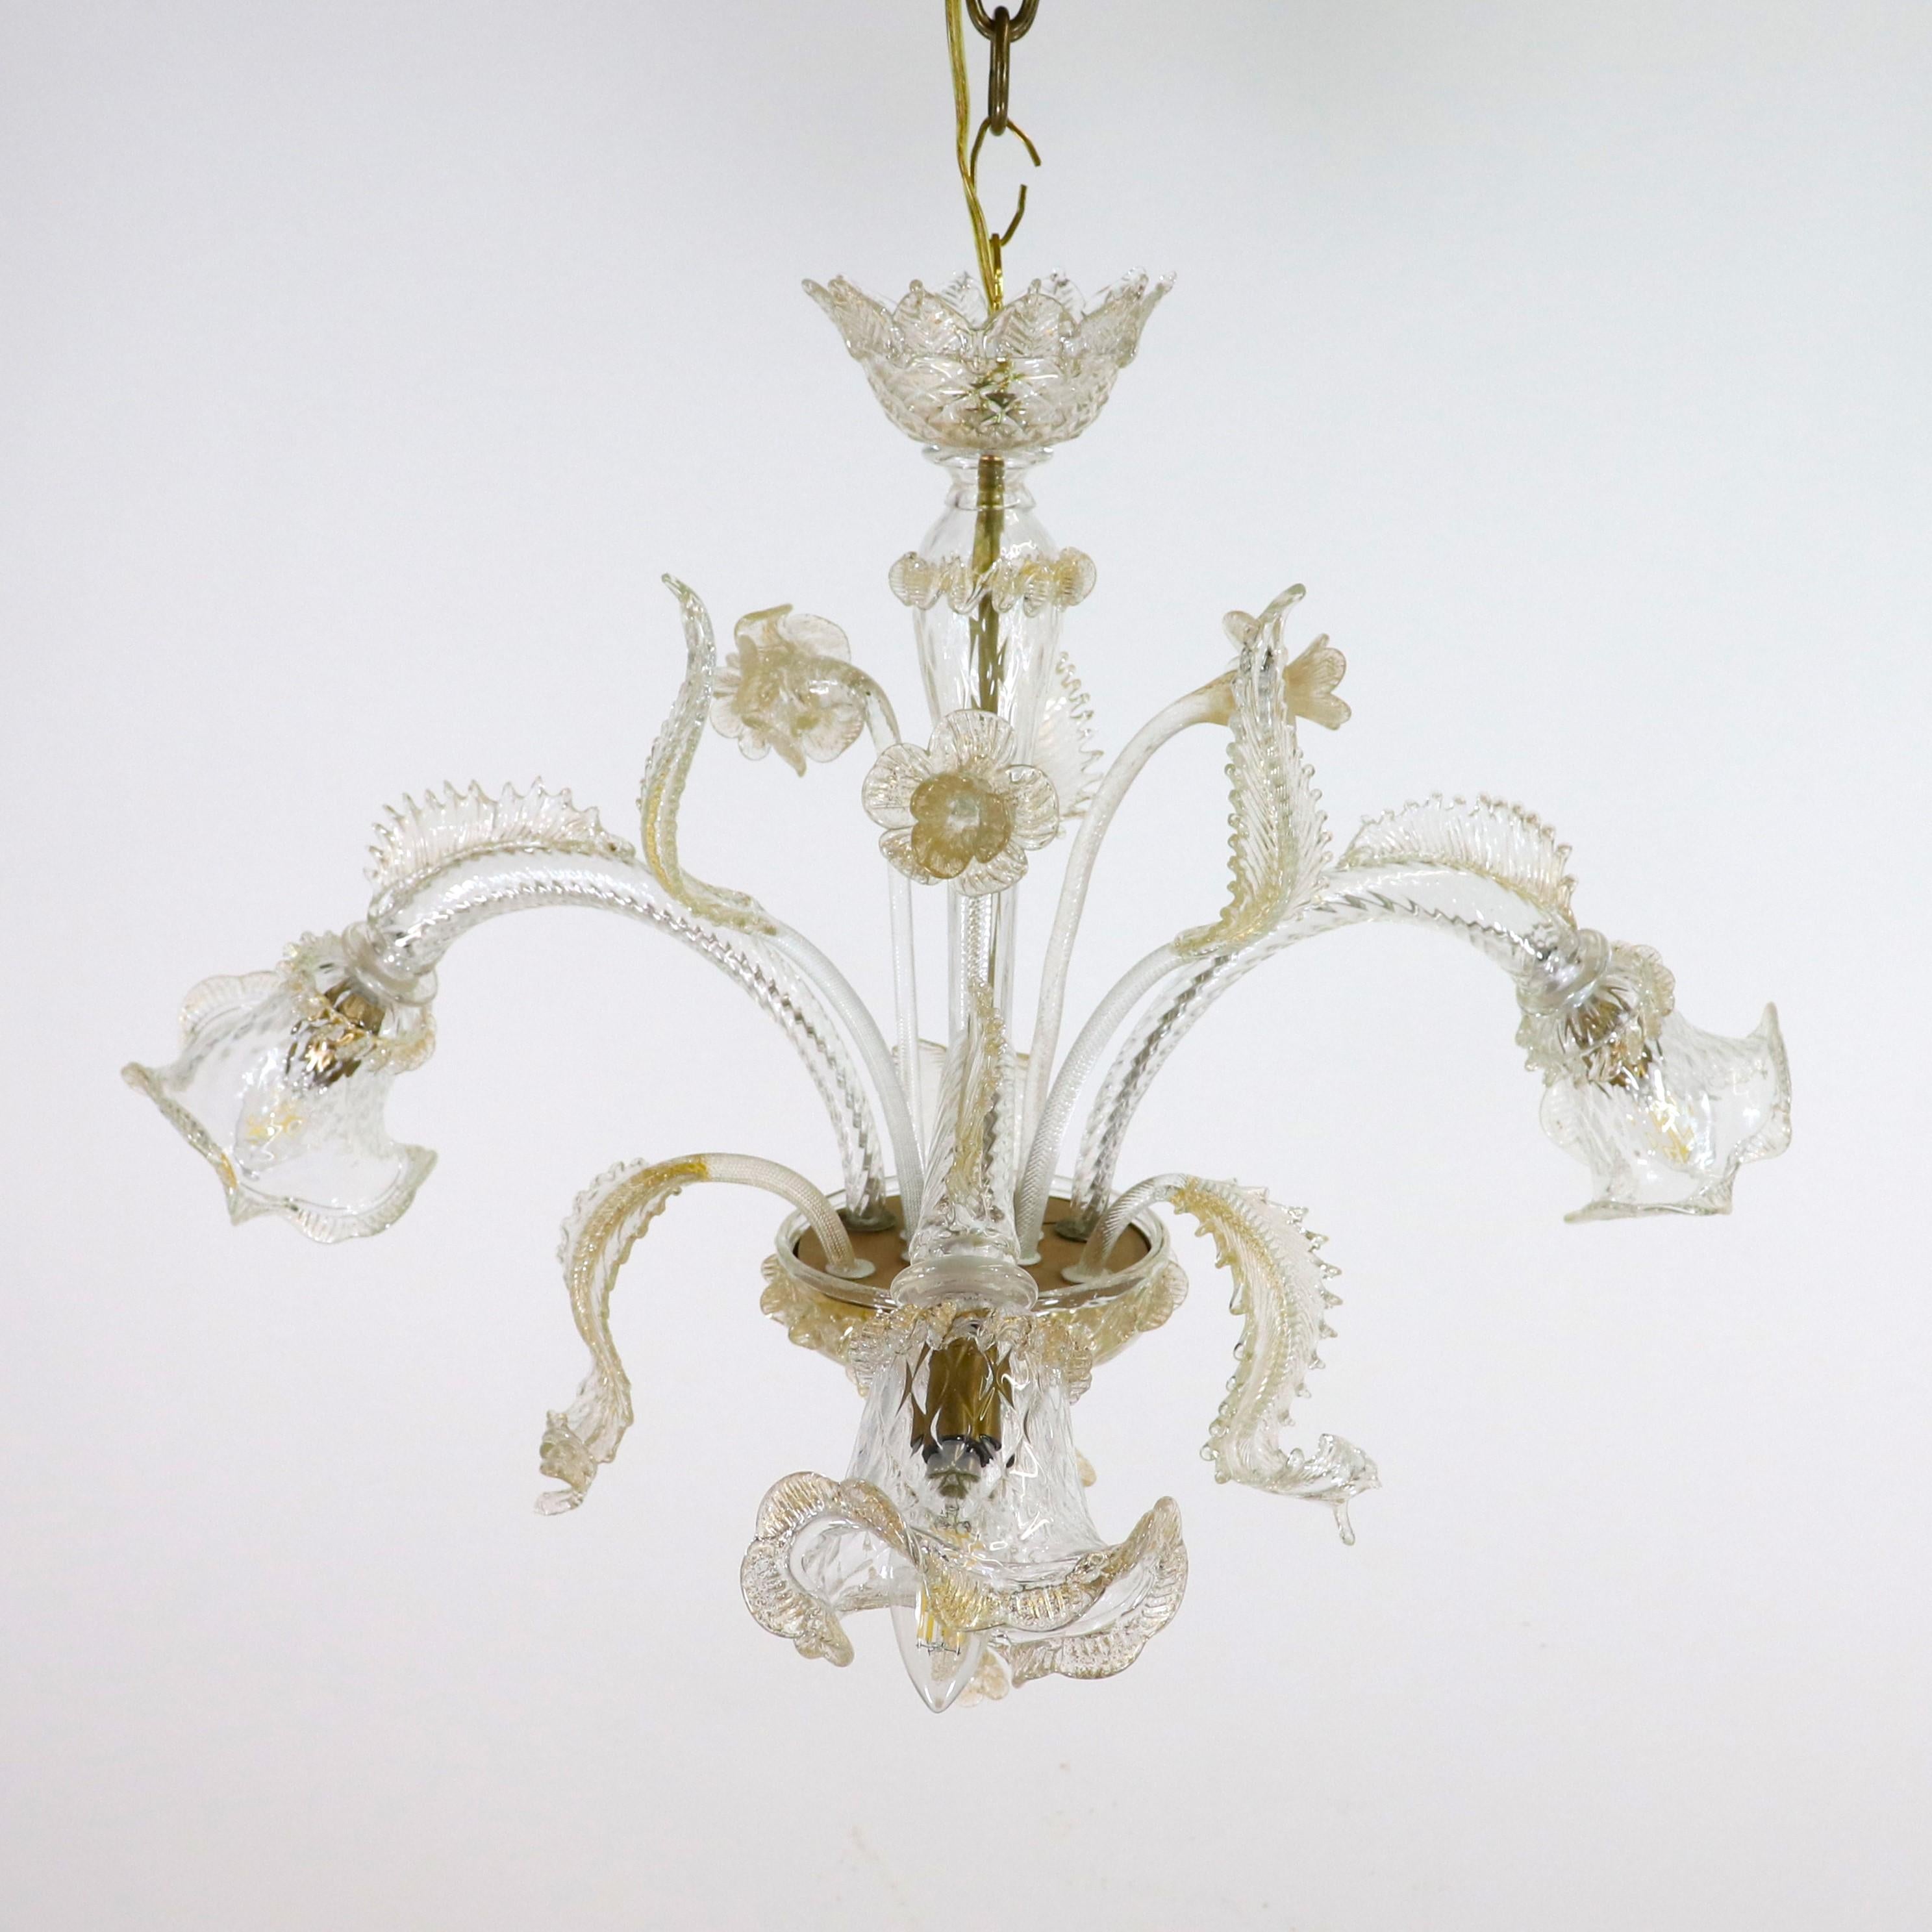 Hand-Crafted Vintage Baroque Style Floral Gold Inflused Three Arm Cristallo Murano Chandelier For Sale